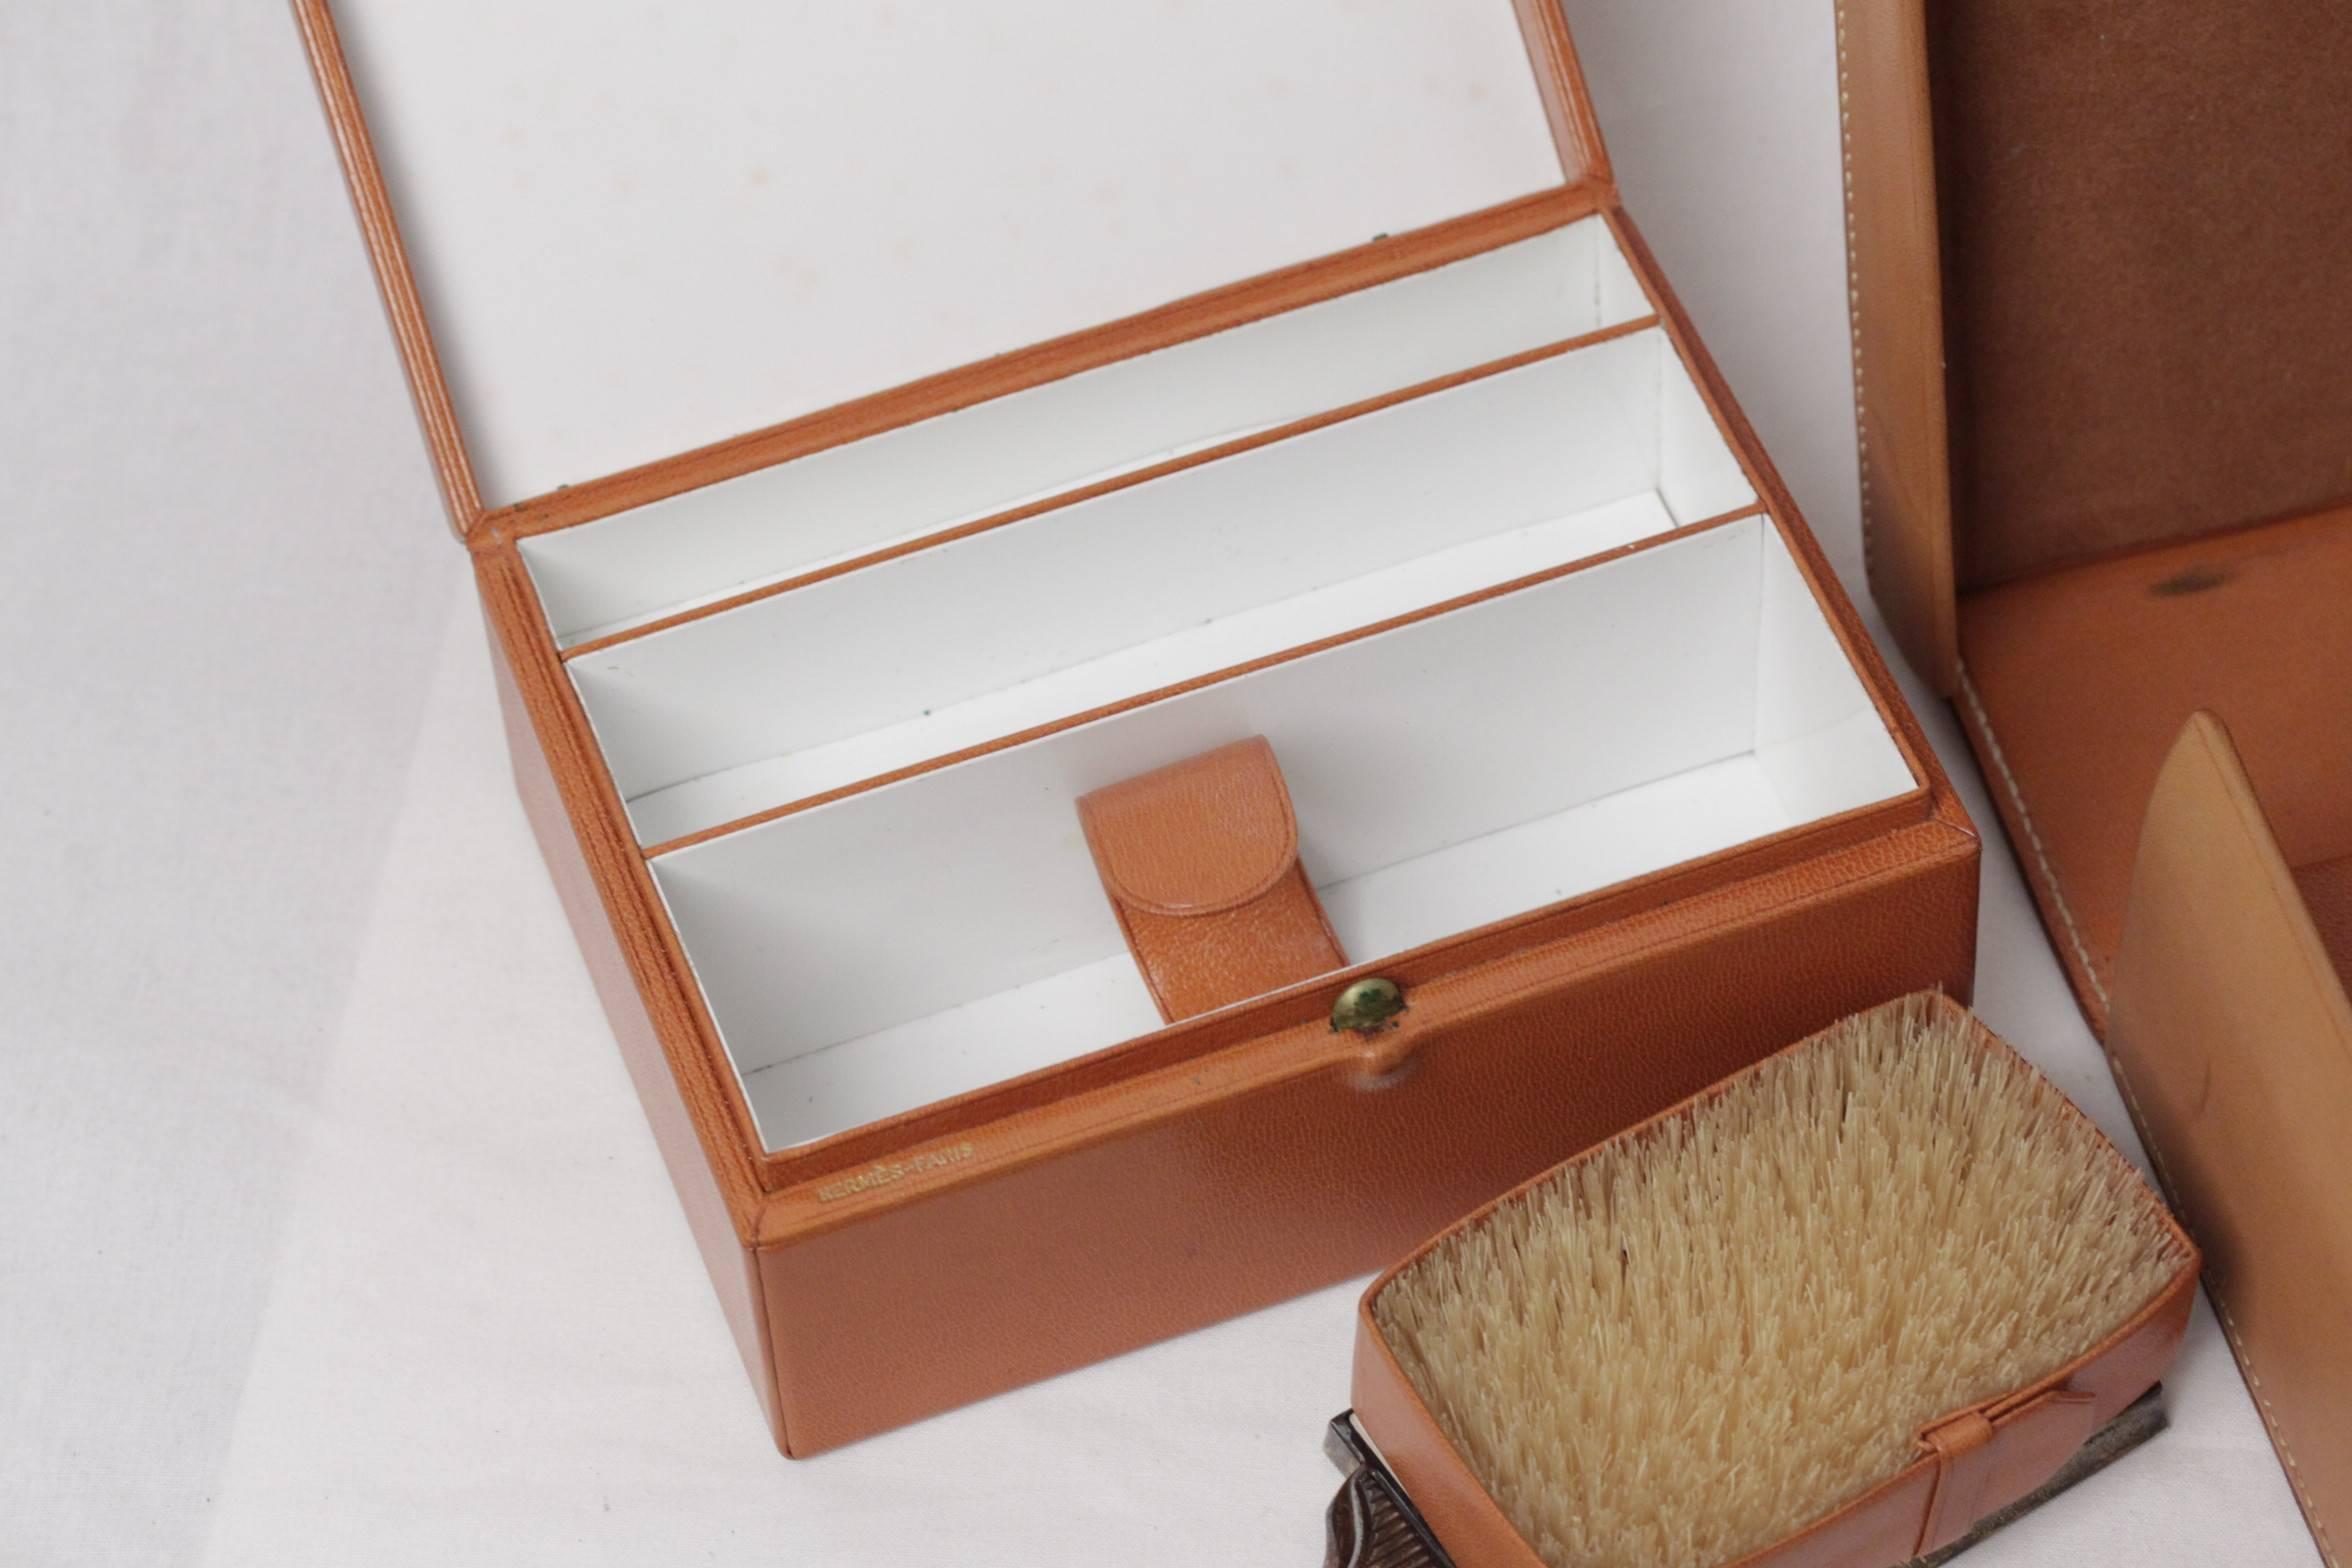 HERMES VINTAGE Tan Leather TRAVEL GROOMING SET w/ Silver TOILETRY Pieces 1